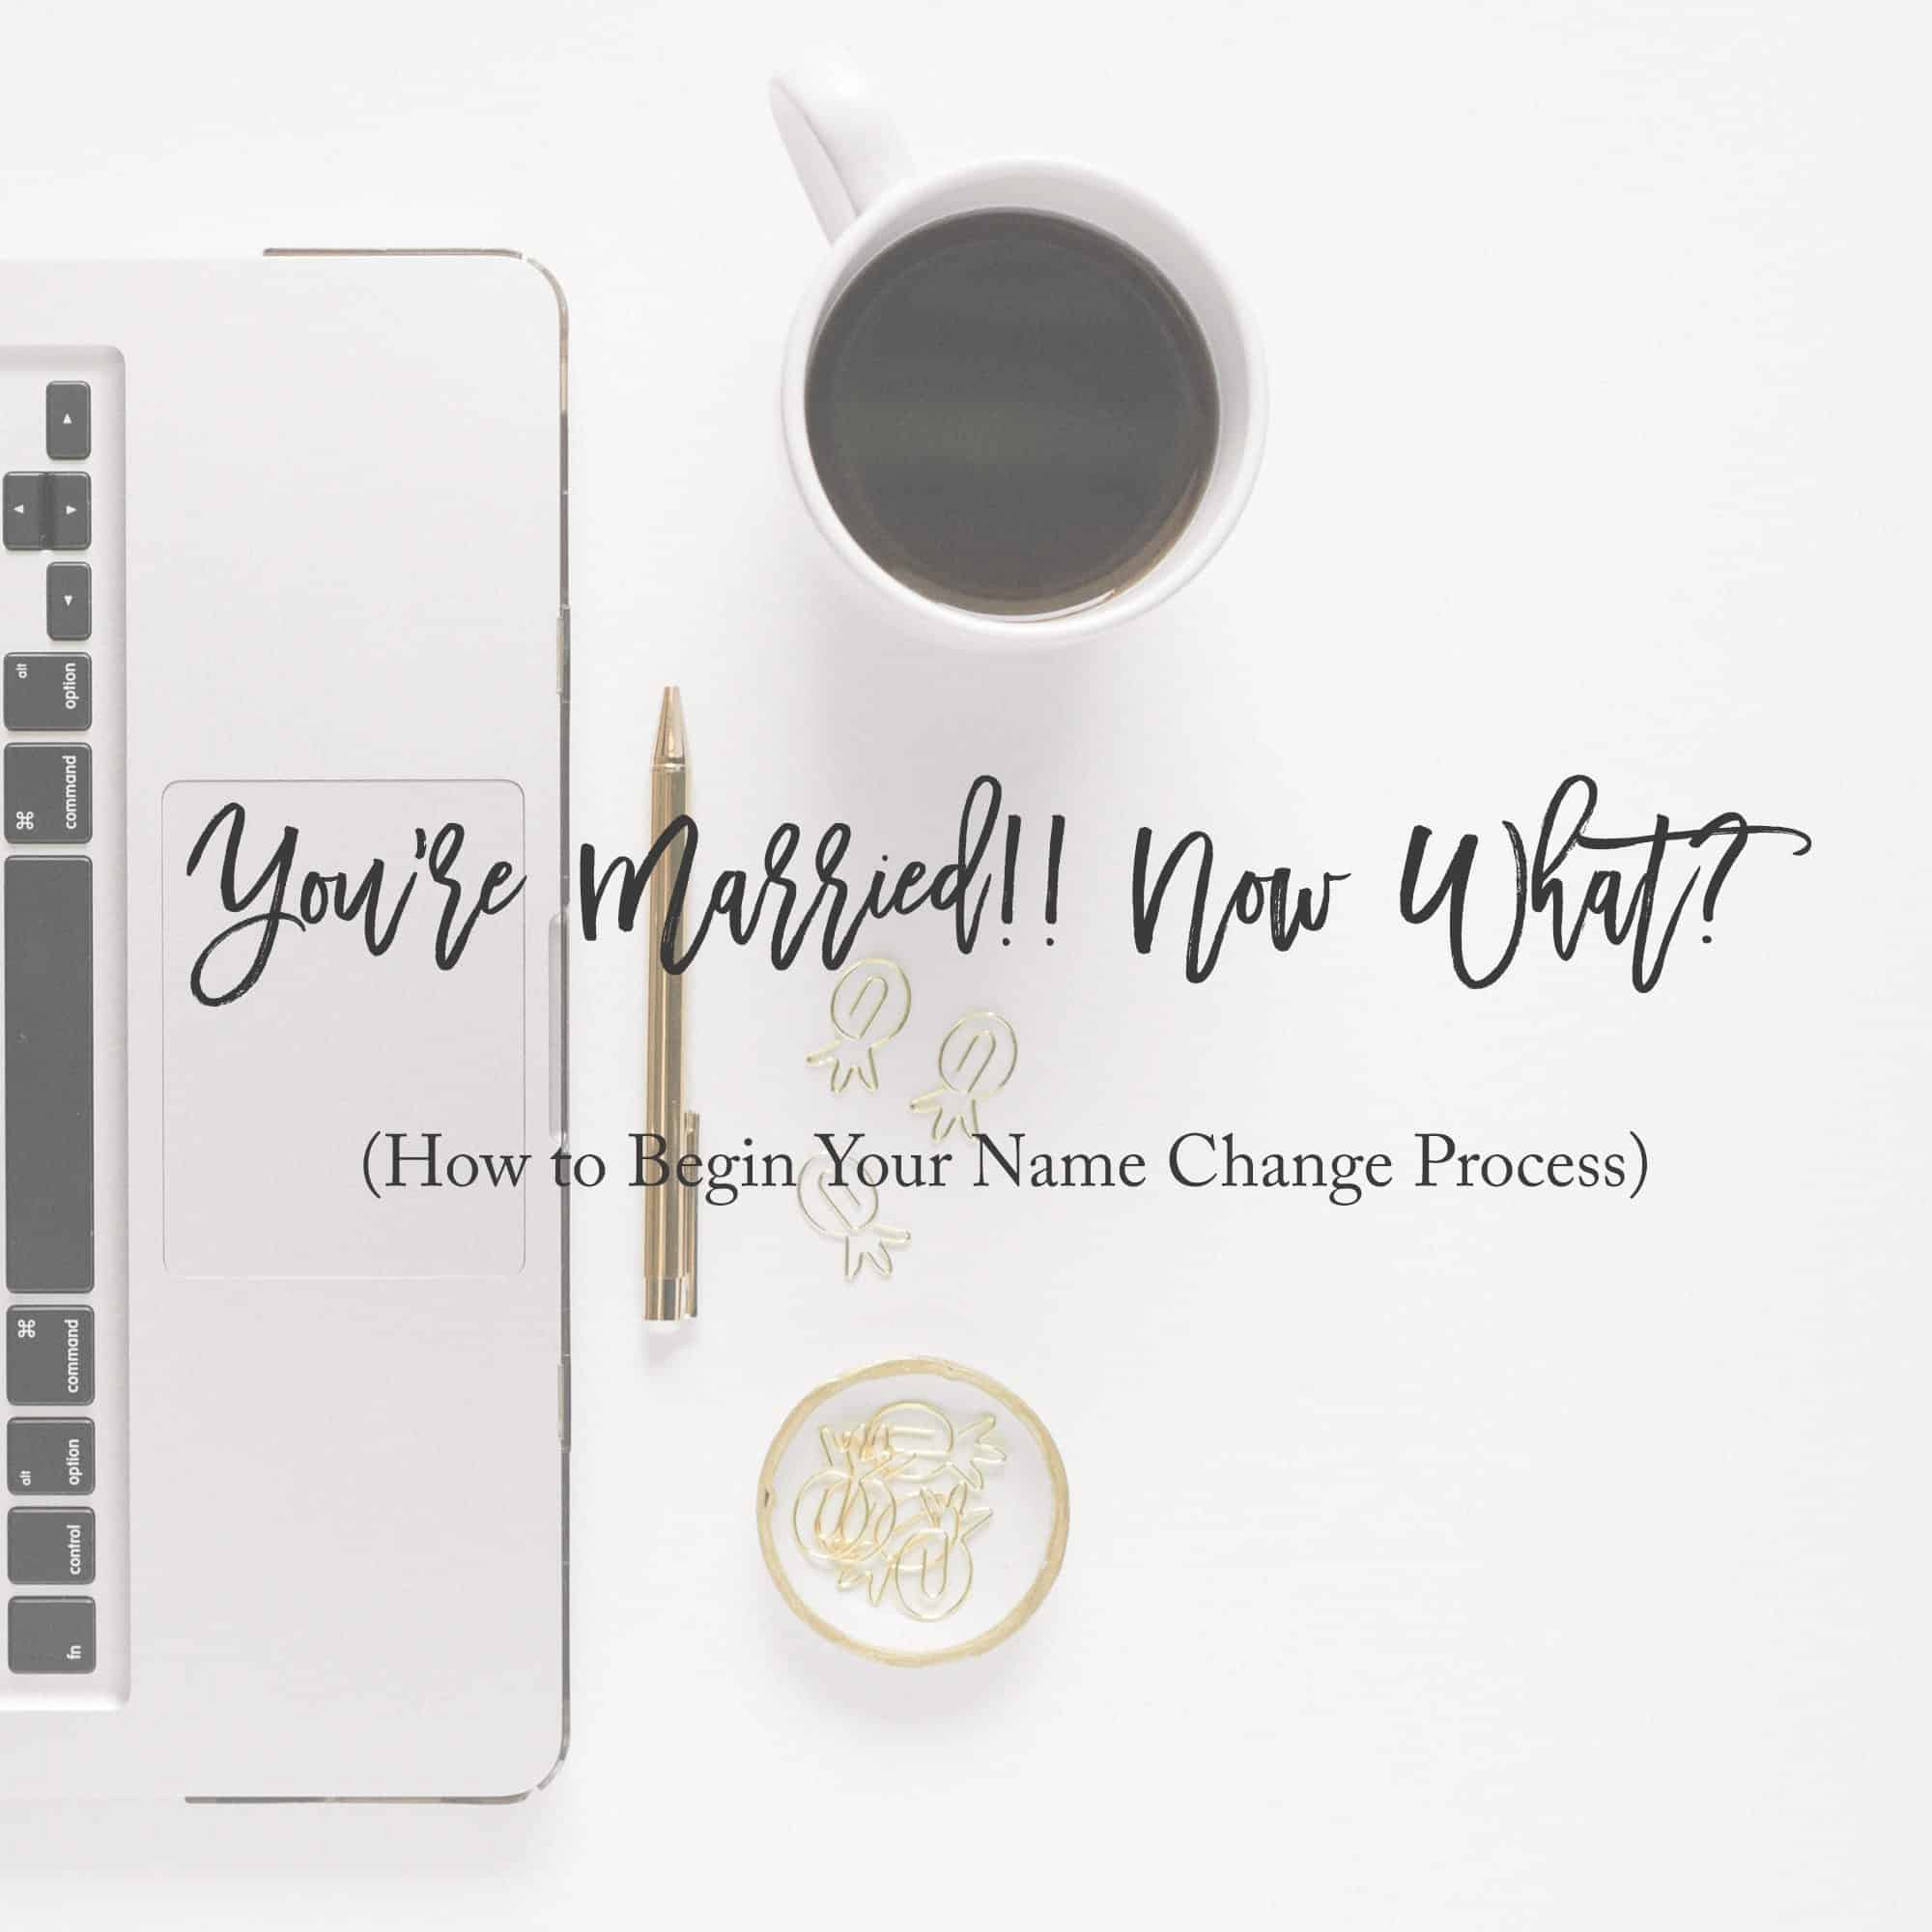 You're Married!! Now What? (How to Begin Your Name Change Process)